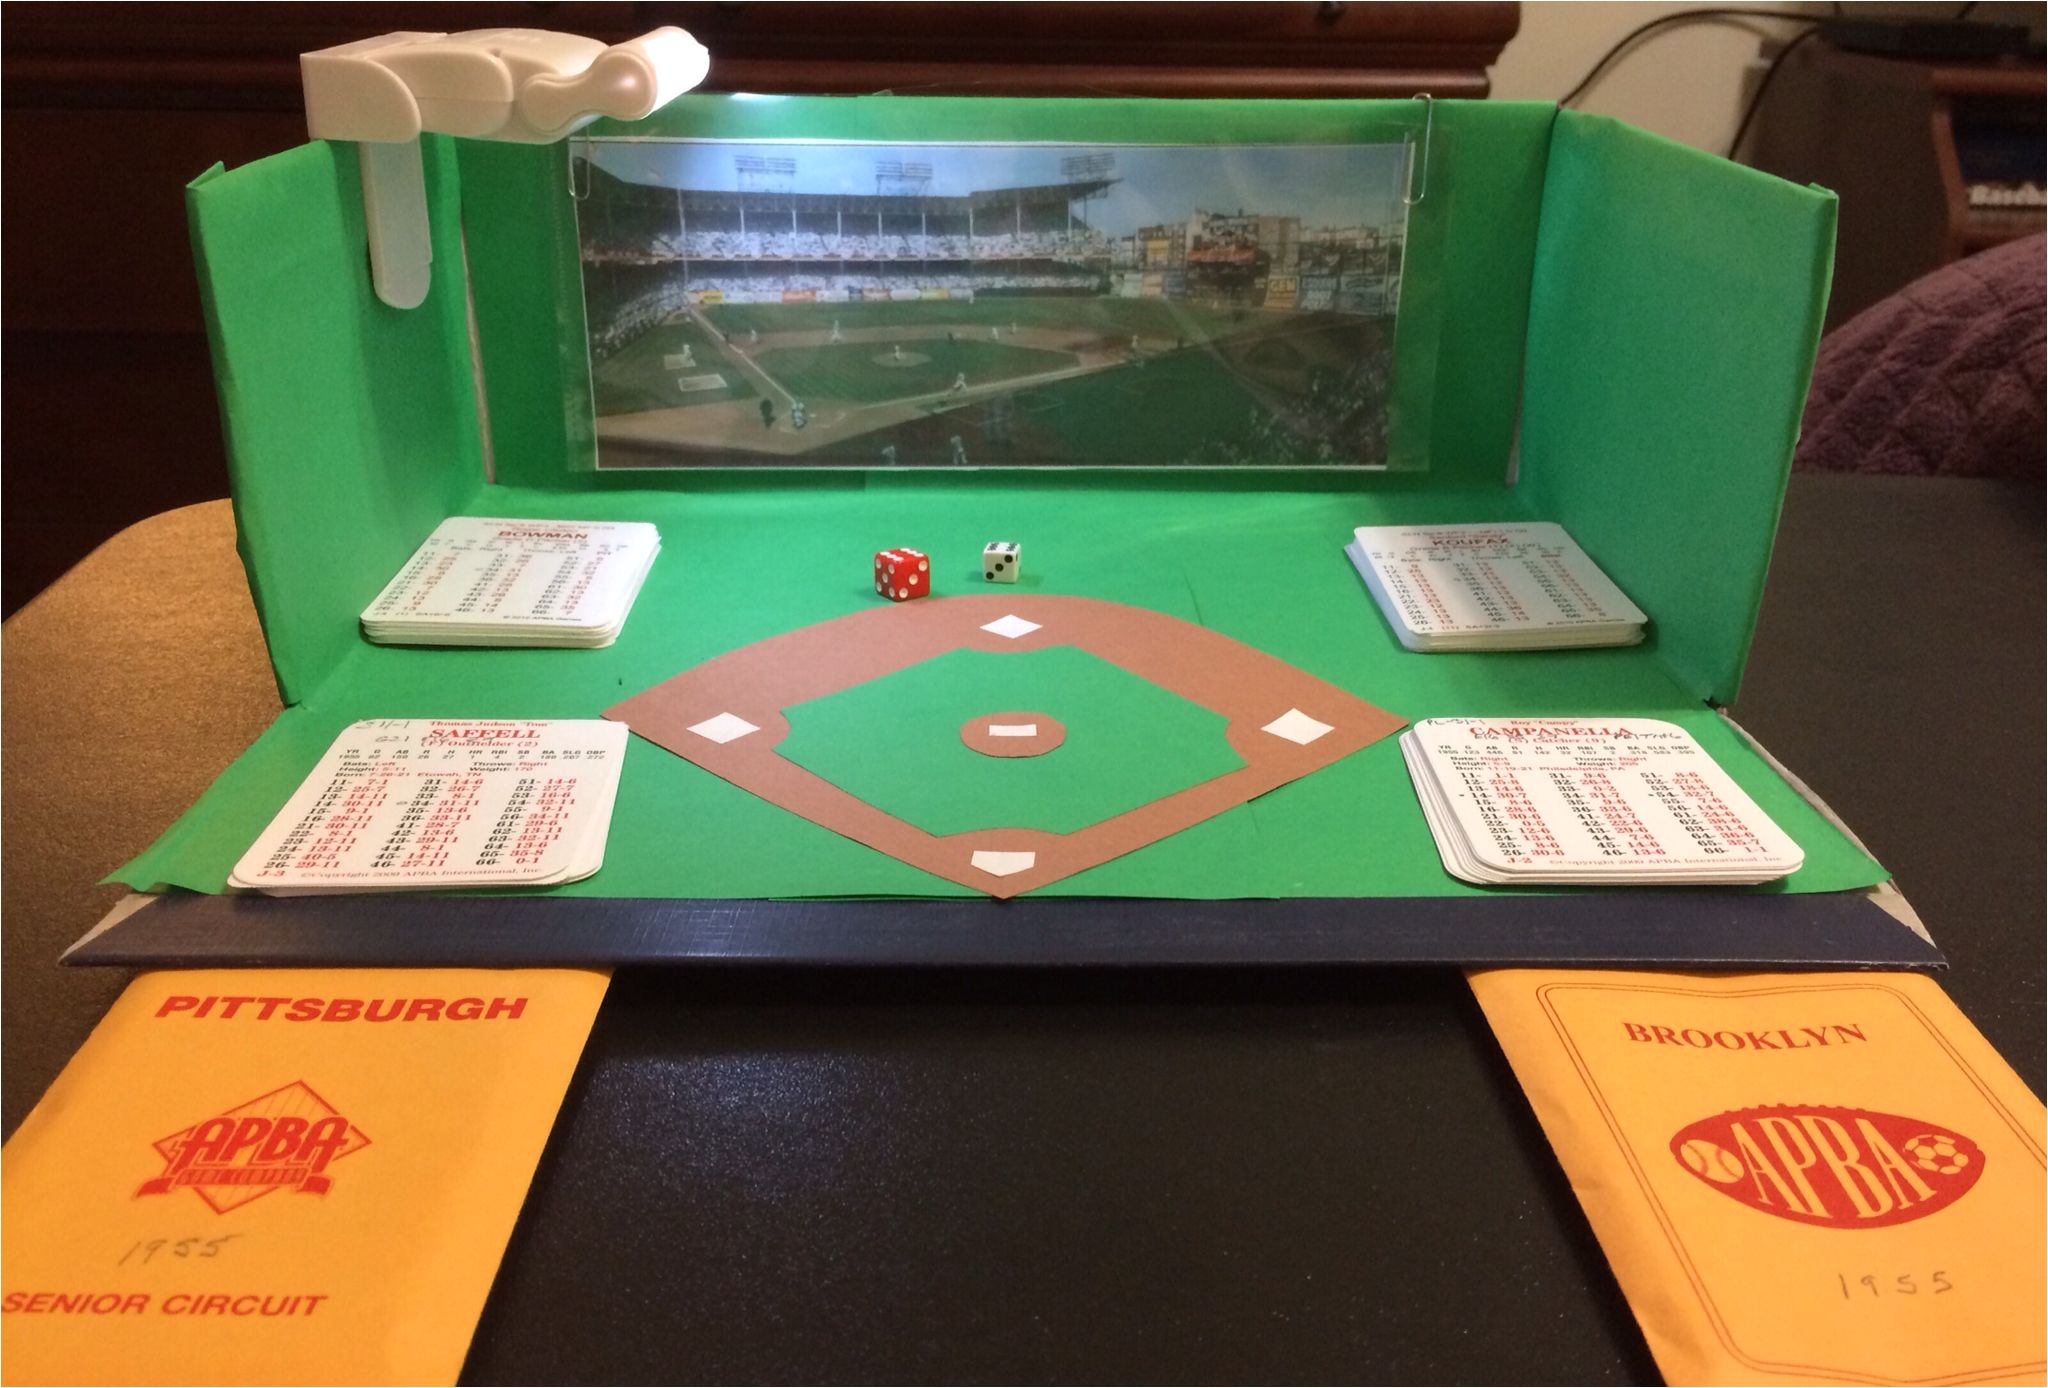 apba baseball field from shoebox and construction paper